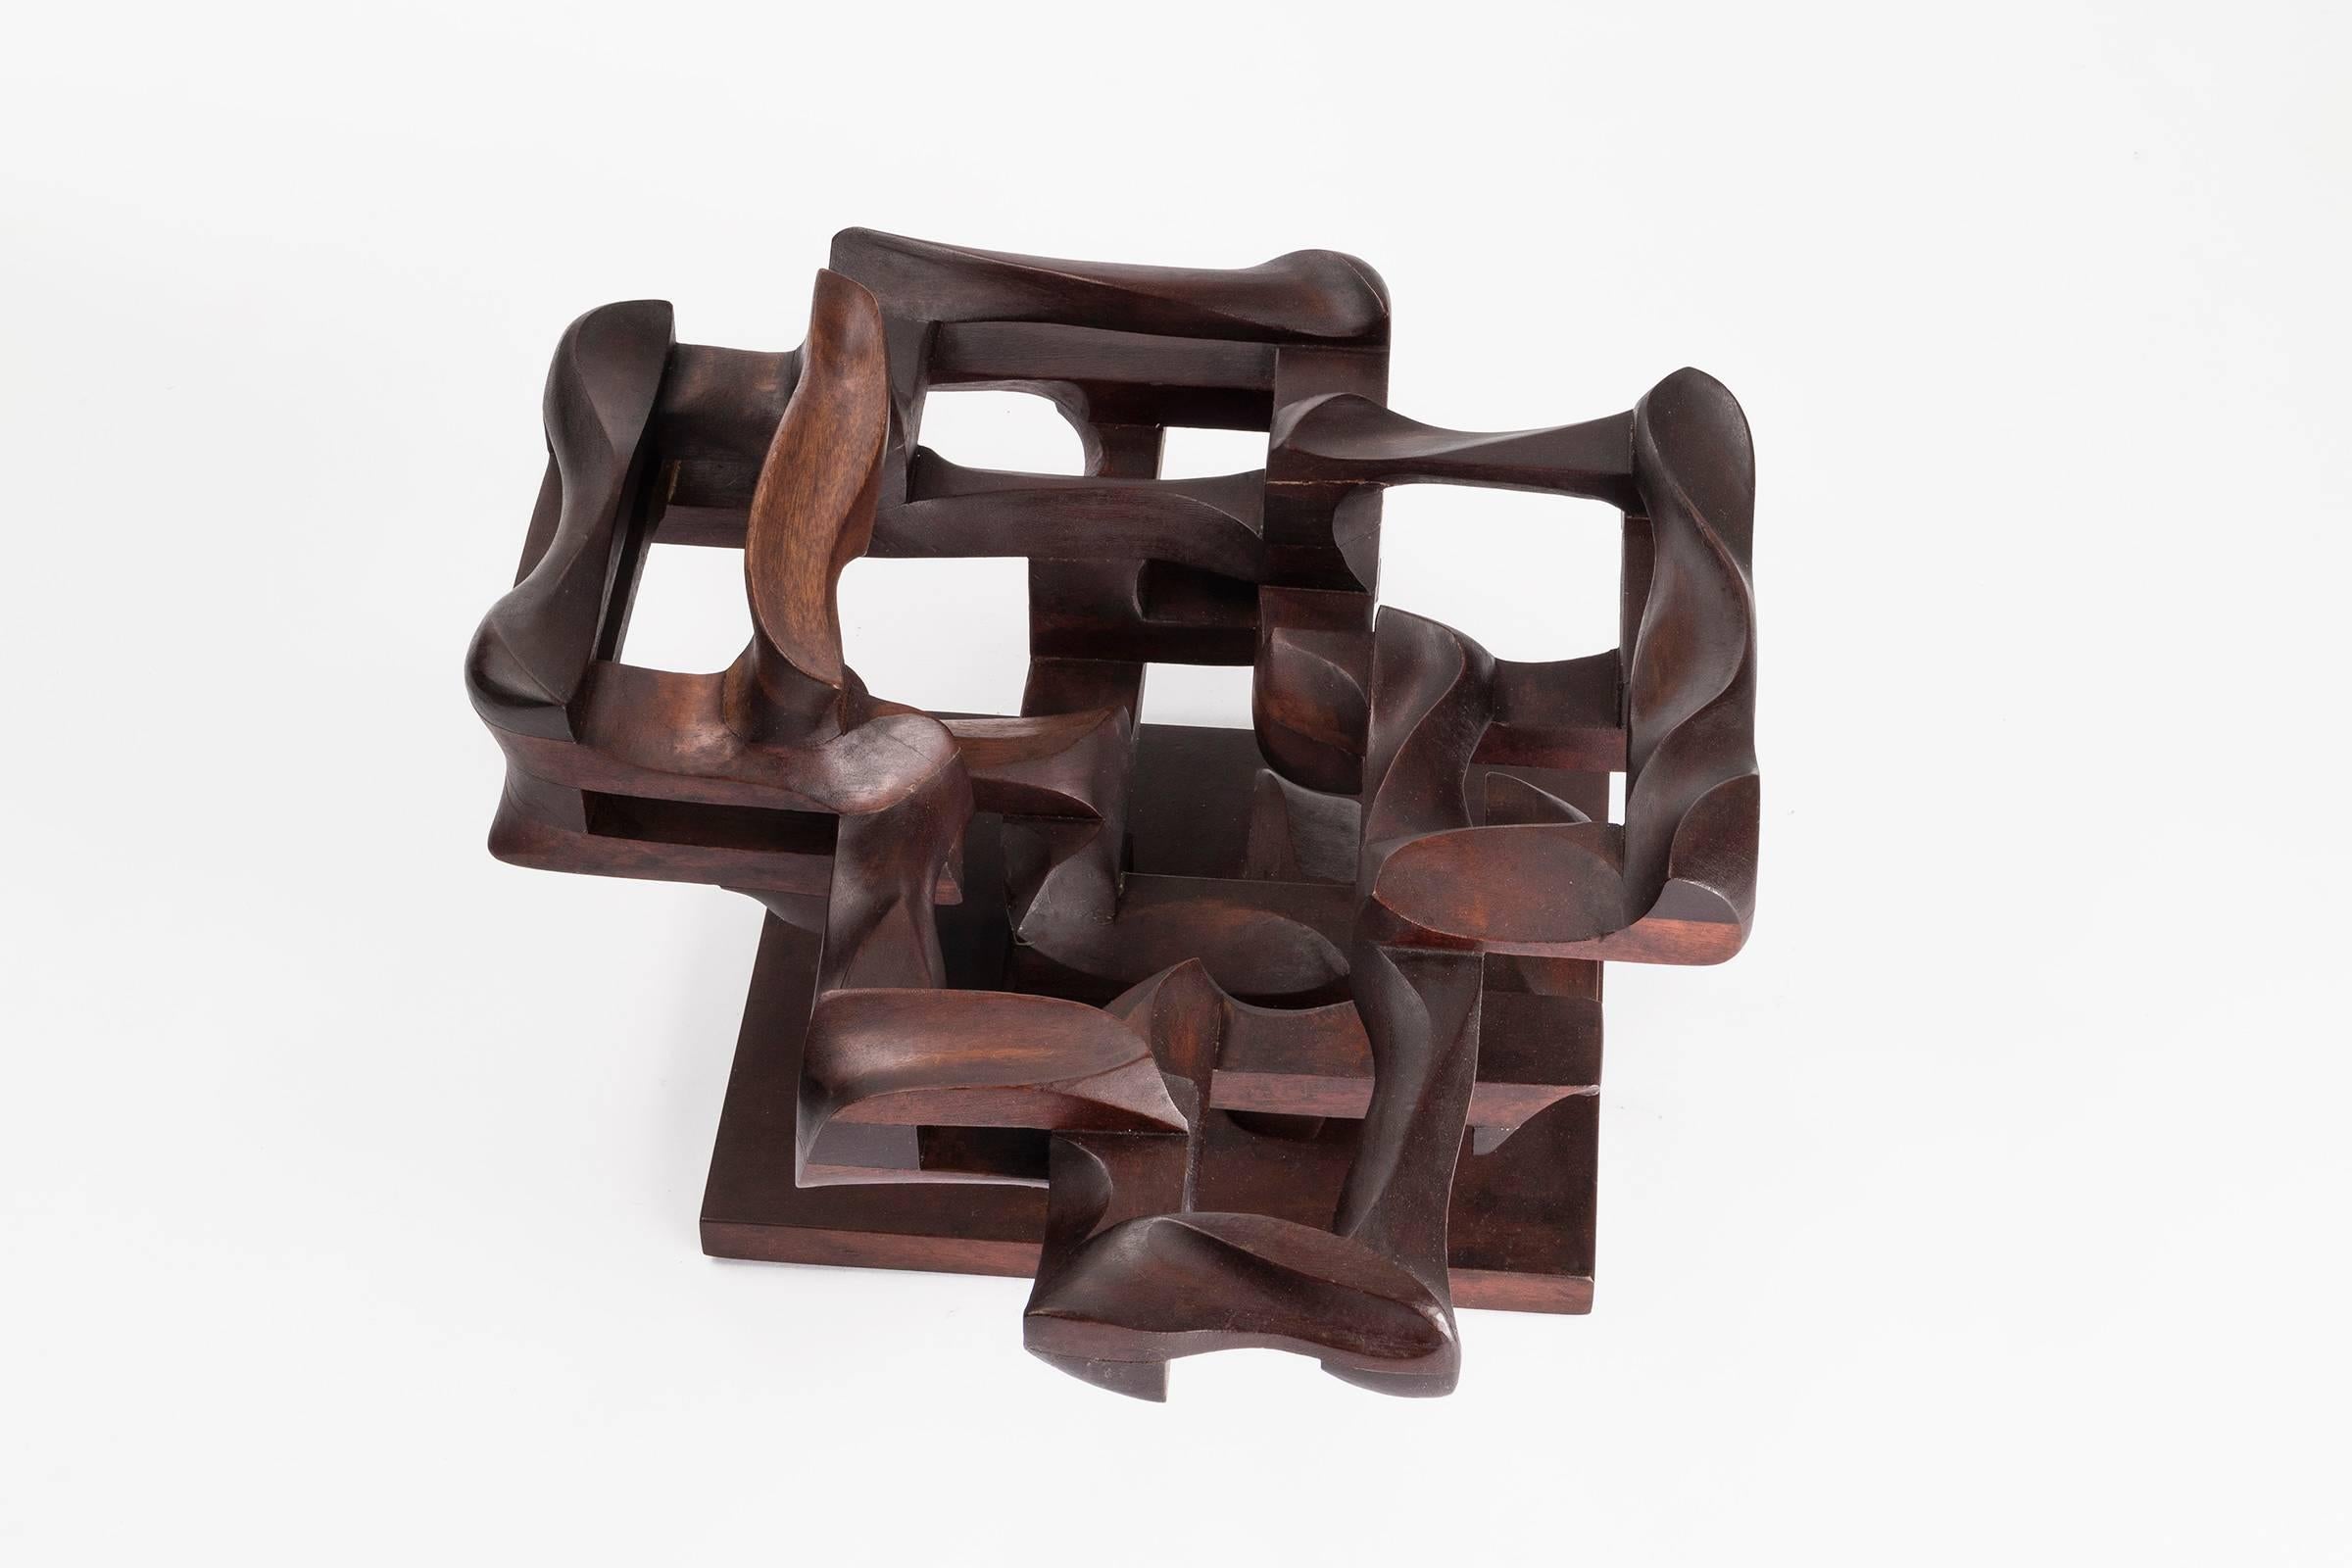 Mario Dal Fabbro - No. 22
'construction' noted on back

Multi-disciplinary artist Mario Dal Fabbro was born in Cappella Maggiore, Italy in 1913. He trained in his family's furniture design shop prior to attending both the R. Superior Institute